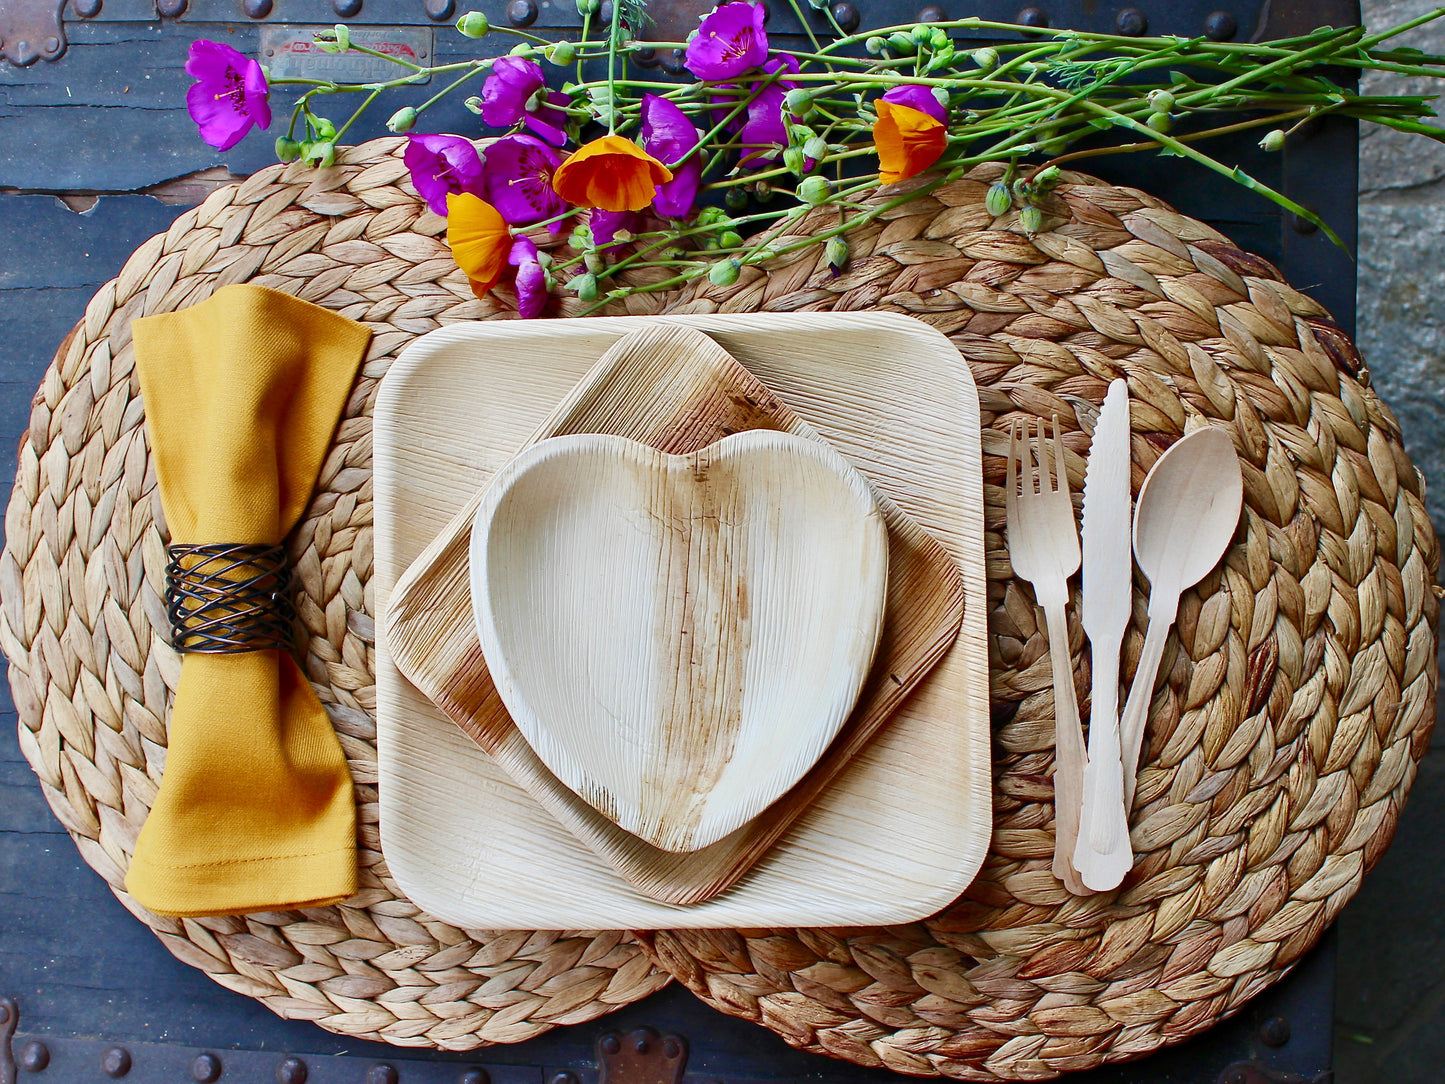 Bamboo Type Palm Leaf plates 10 Pice 9.5" Square- 10 pic heart 6" 30 Pic cutlery  and 10 pice Napkin